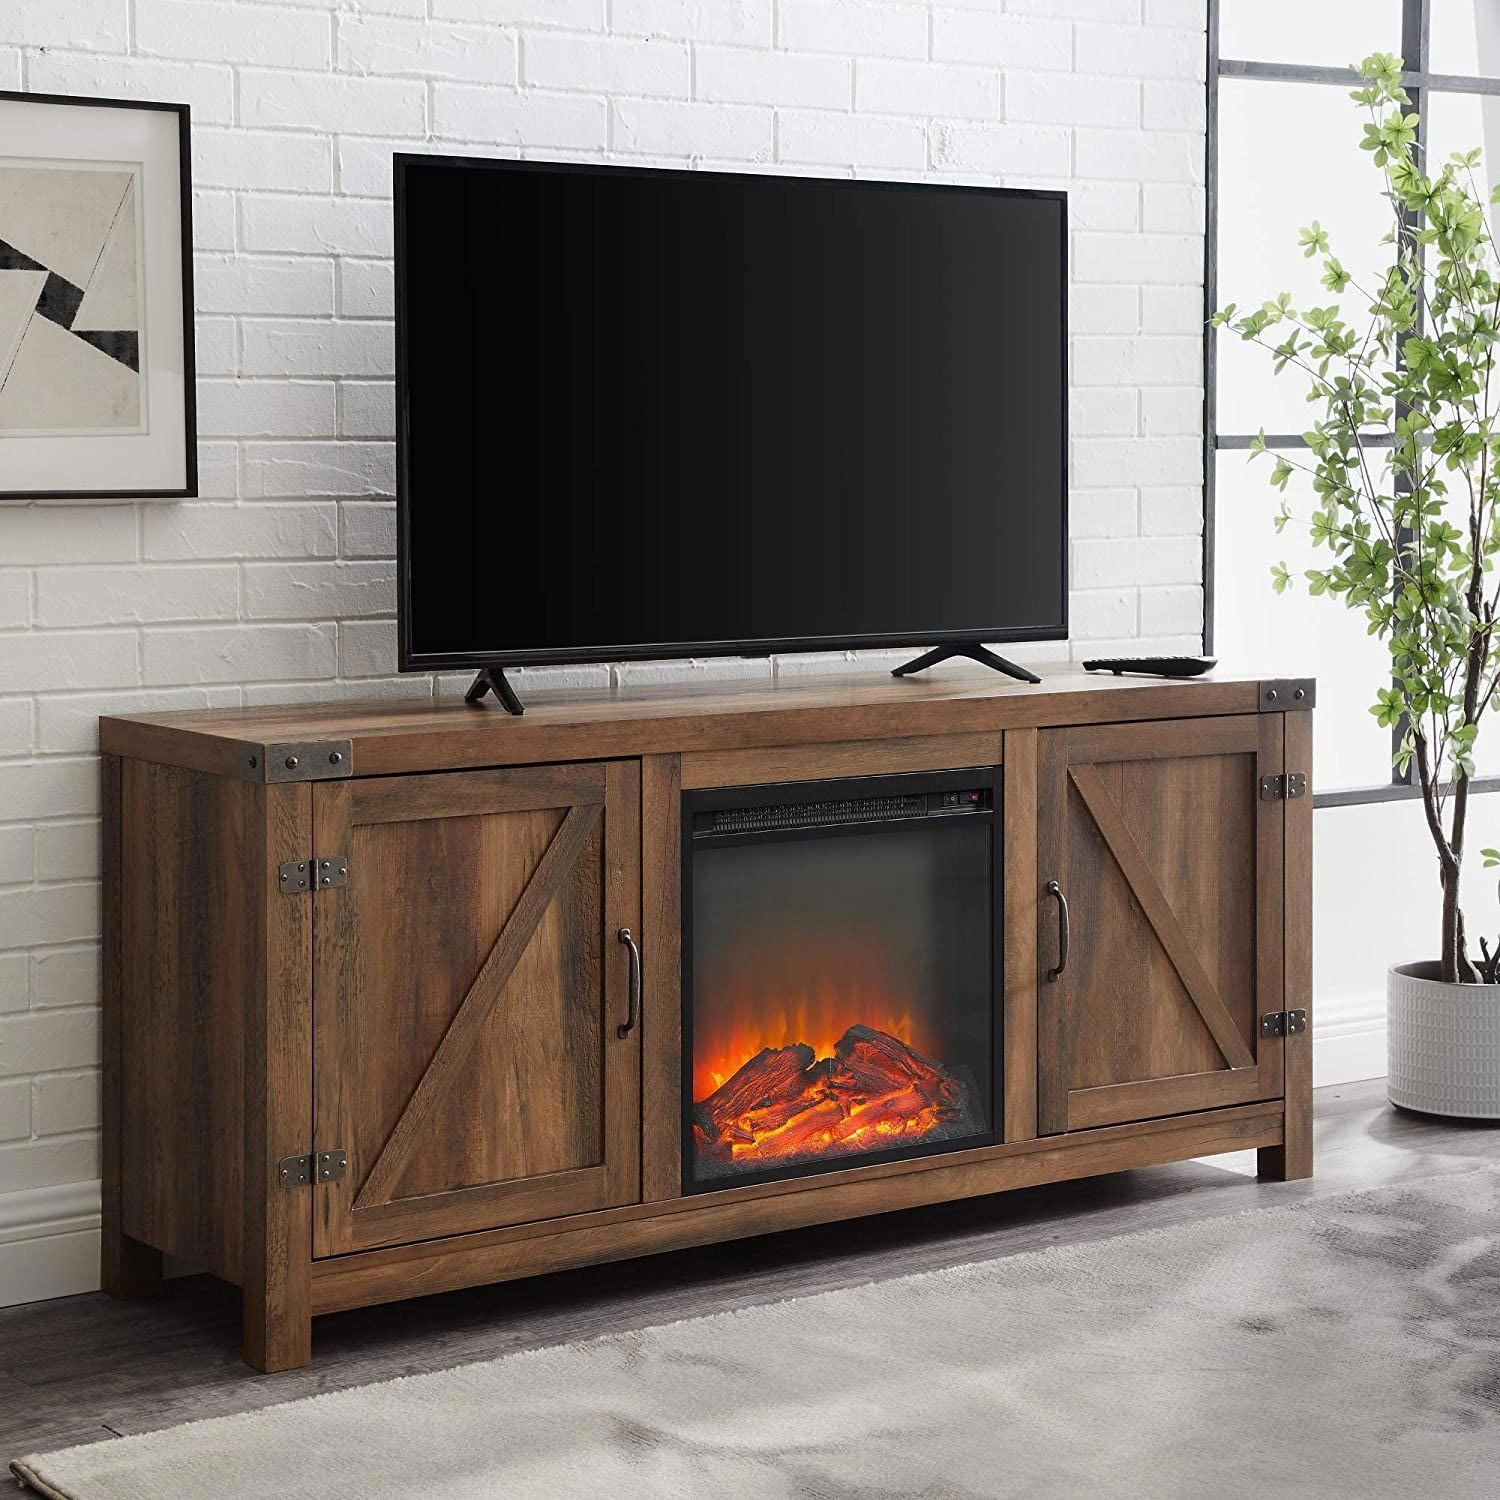 Snuggle Up Next To An Electric Fireplace On Valentines Day